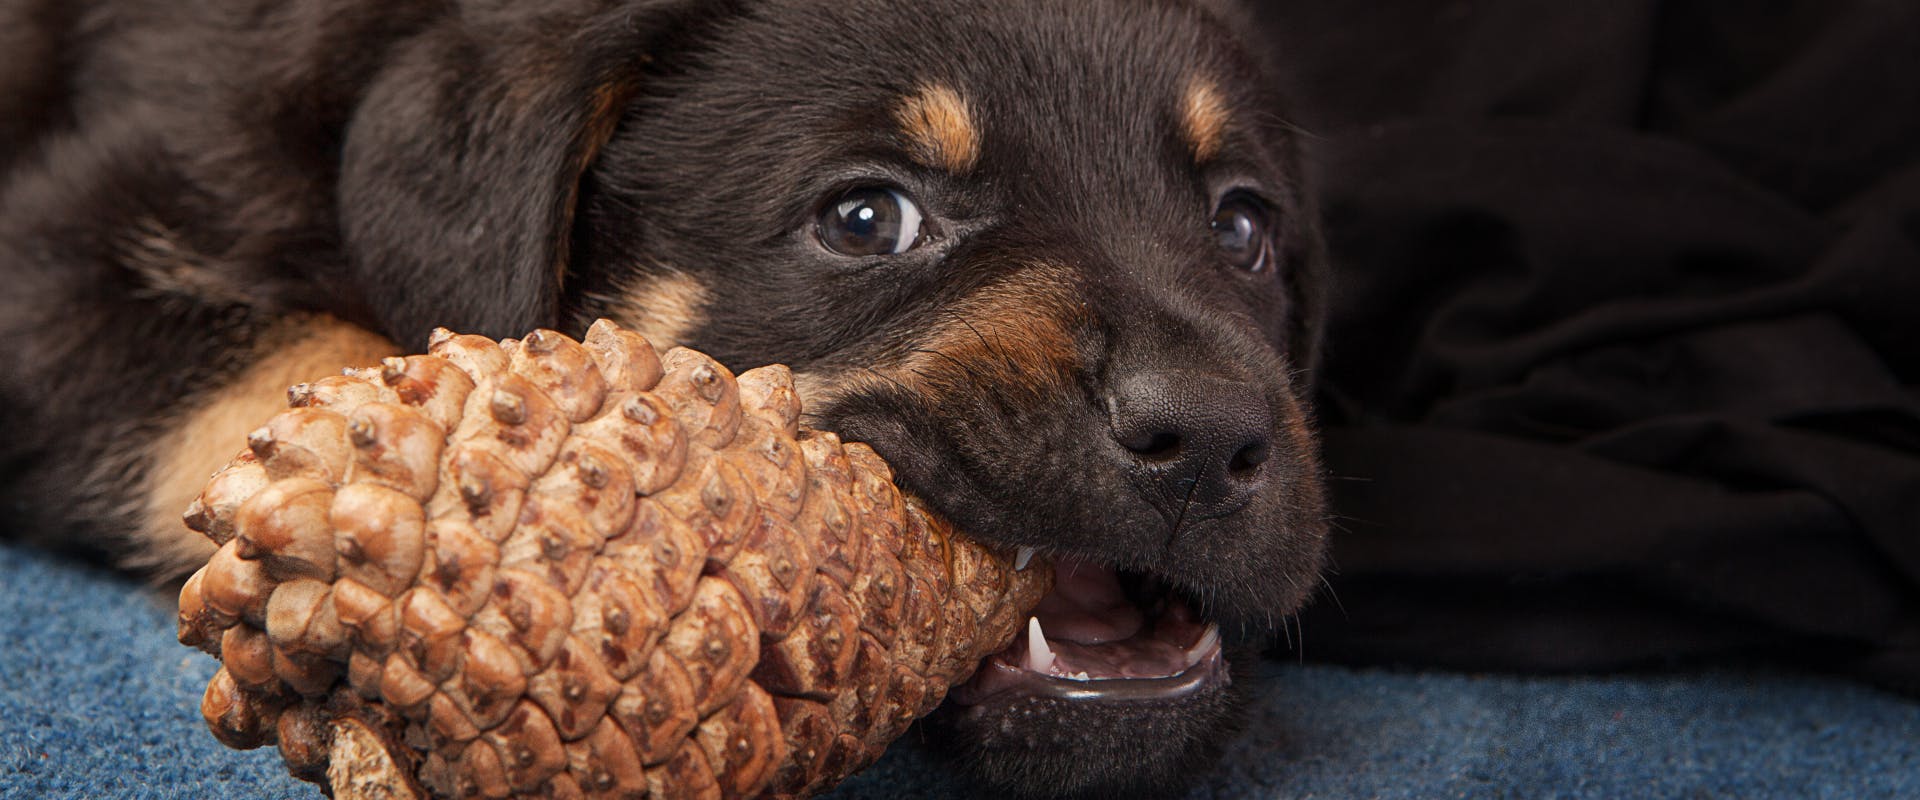 Puppy-Proofing Your Home: 4 Things You Should Know - Toast Life